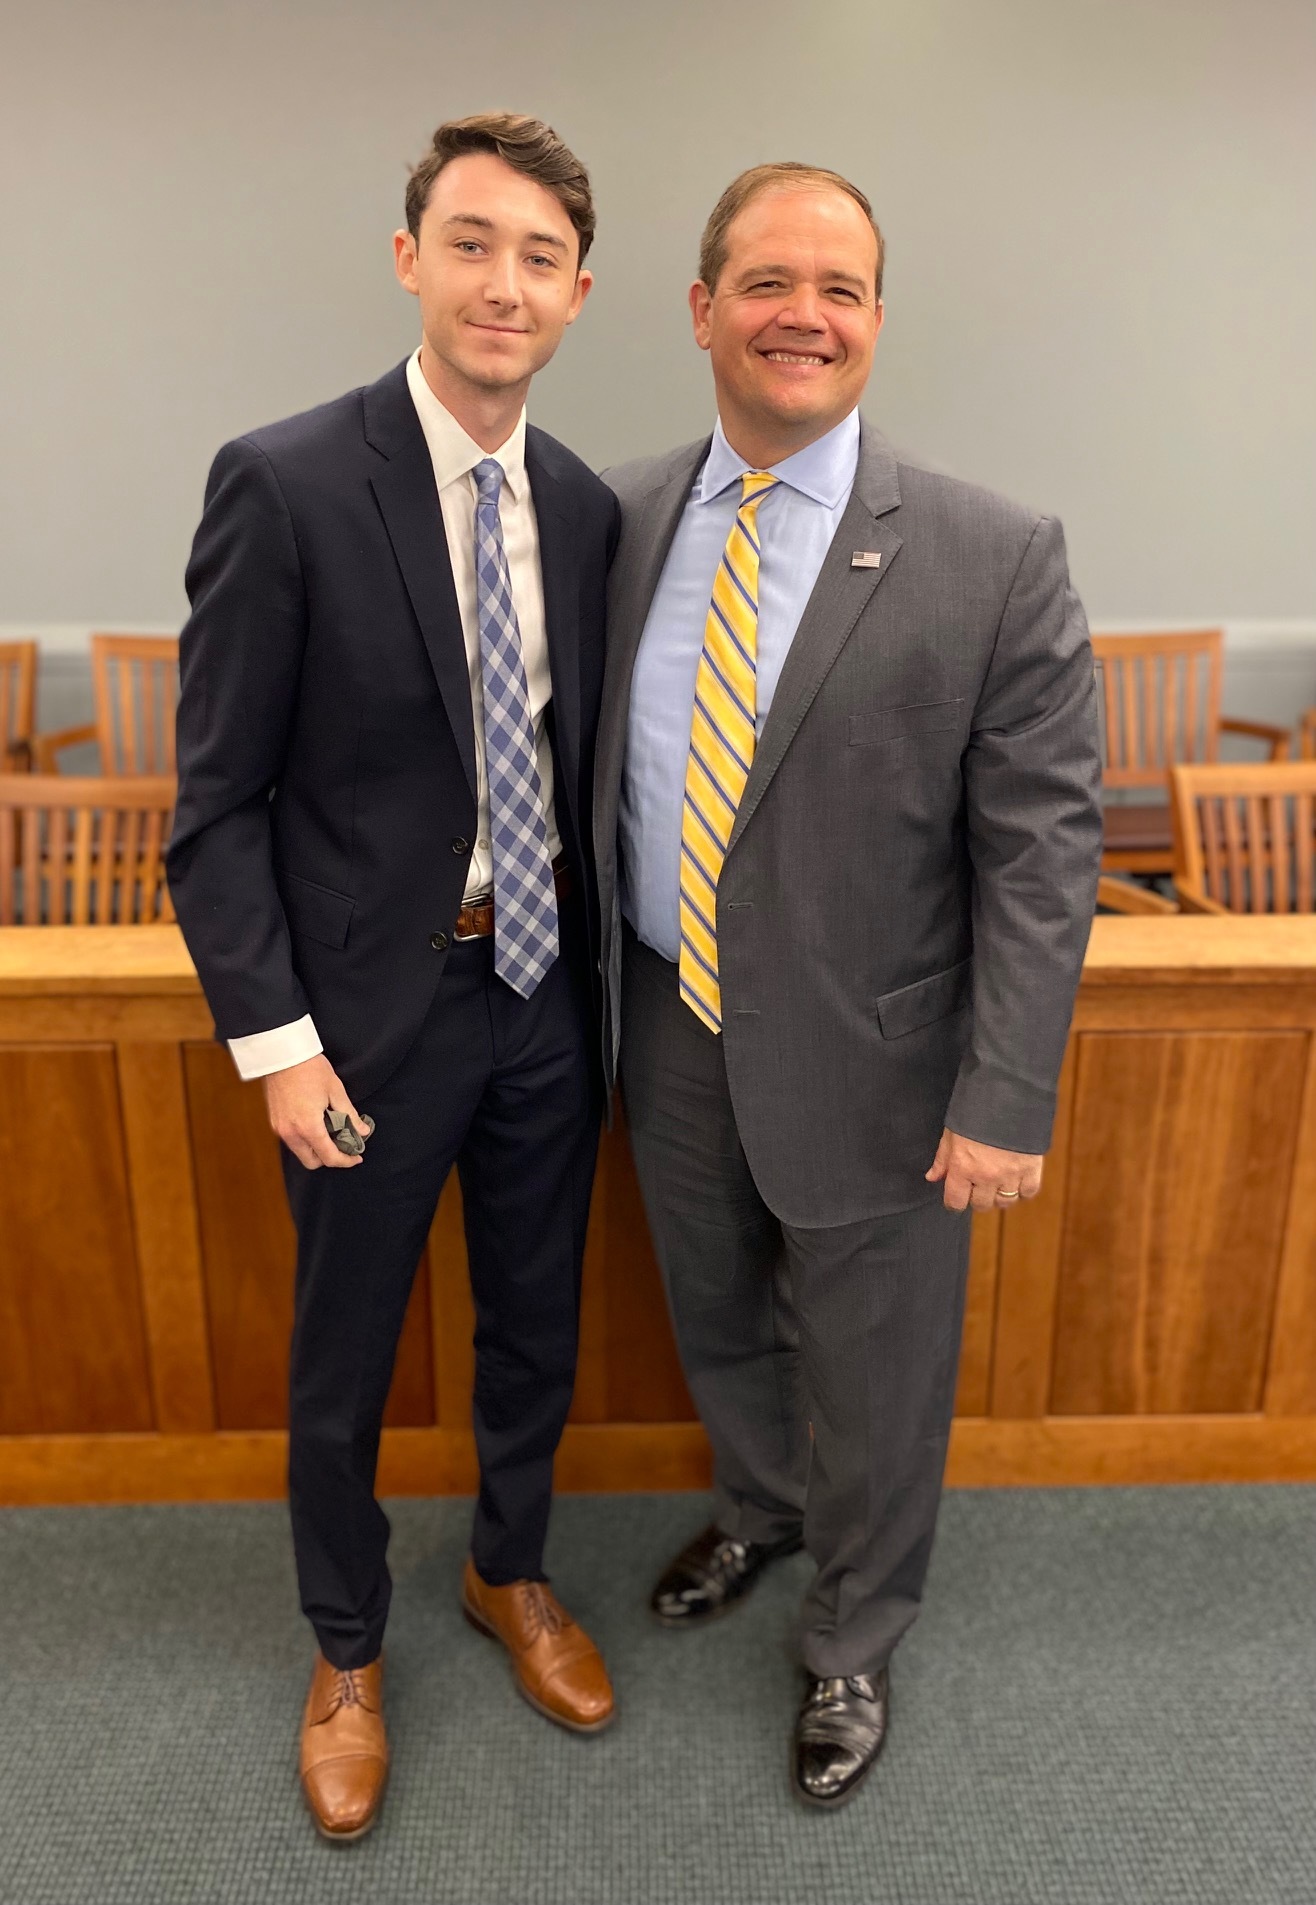 Samuel Beck of East Hampton is among the law students who were selected to intern with Suffolk County District Attorney Raymond  Tierney this summer. Beck is studying law at American University Washington College of Law and is assigned to the DA's Appeals Bureau.  COURTESY SUFFOLK COUNTY DISTRICT ATTORNEYS OFFICE